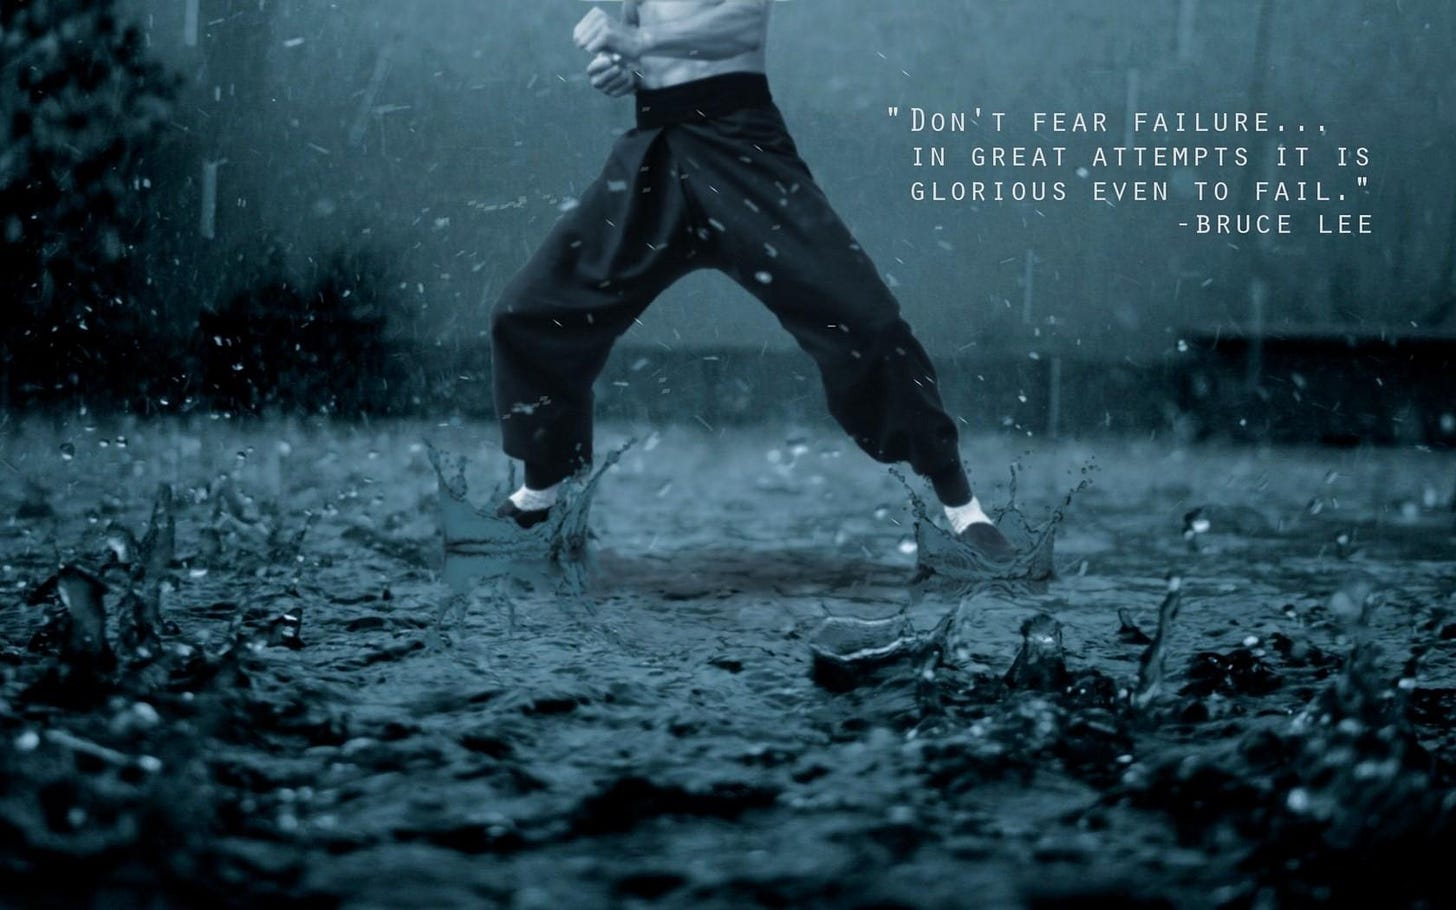 Image] "Don't fear failure... in great attempts it is glorious even to fail."  ~ Bruce Lee : r/GetMotivated